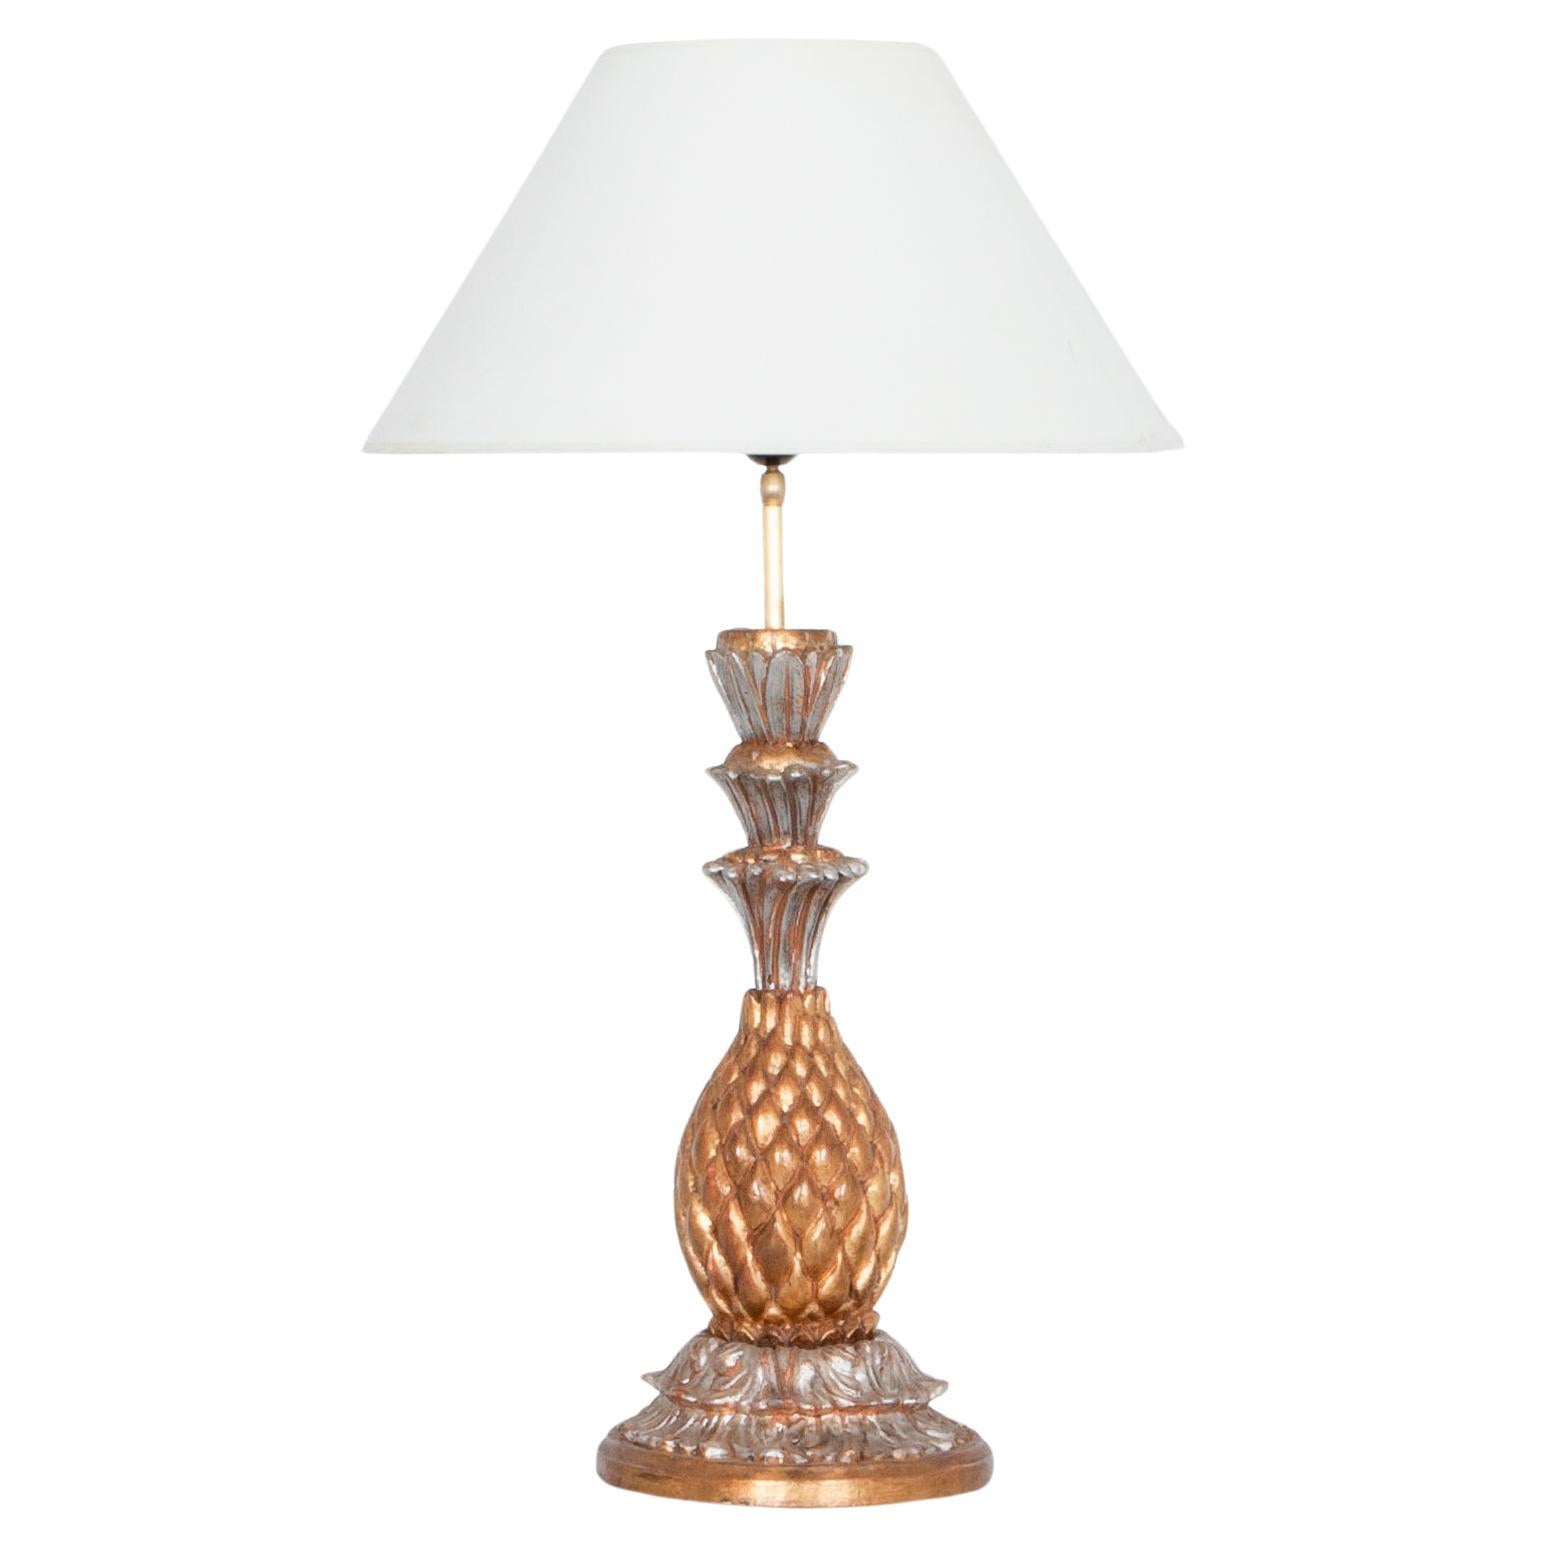 1970s French Pineapple Lamp For Sale